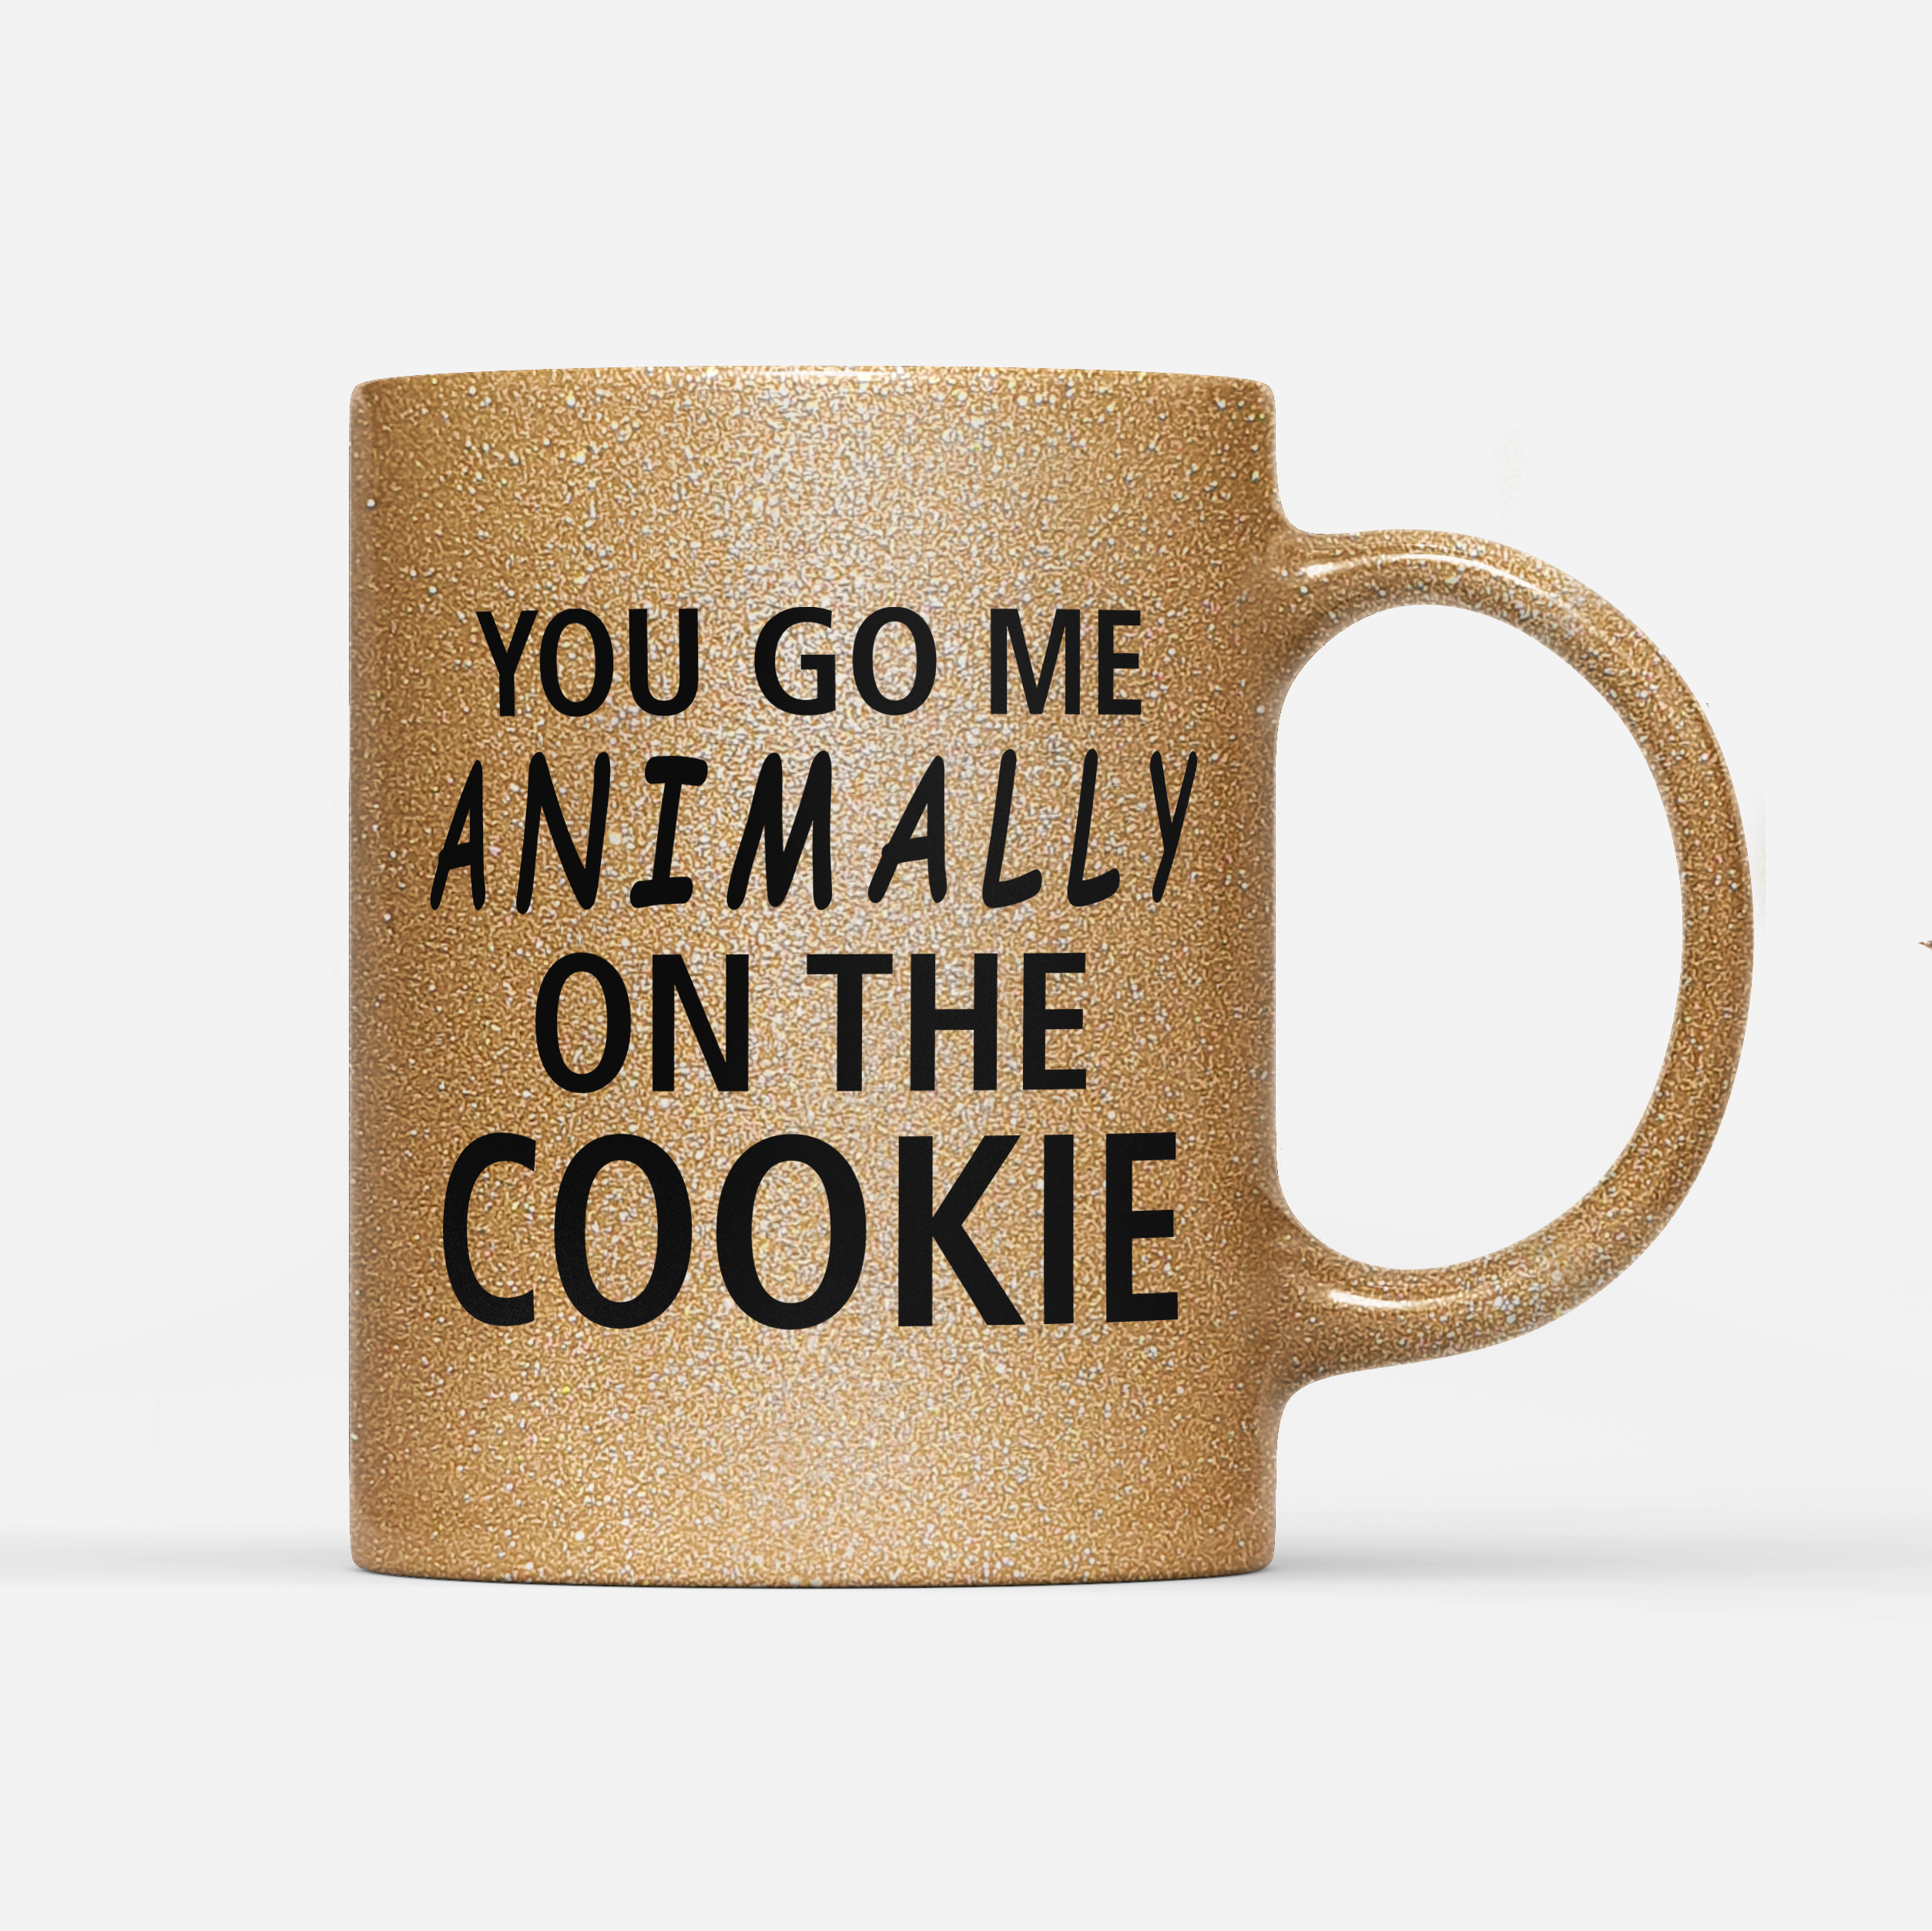 Tasse Glitzer Edition You go me animally on the Cookie